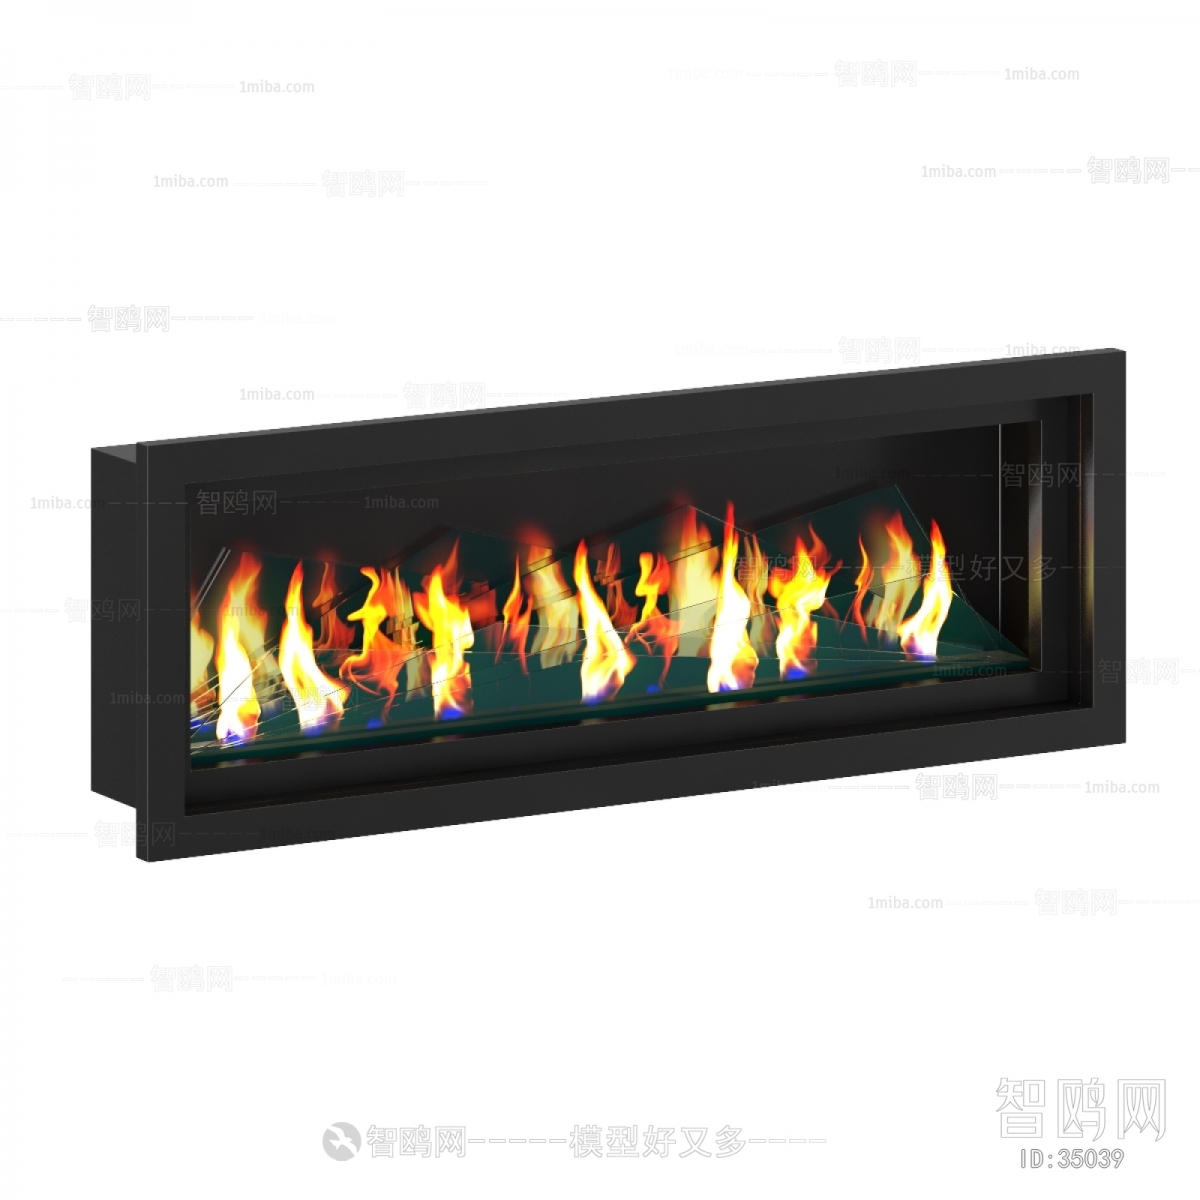 Modern Industrial Style Fireplace